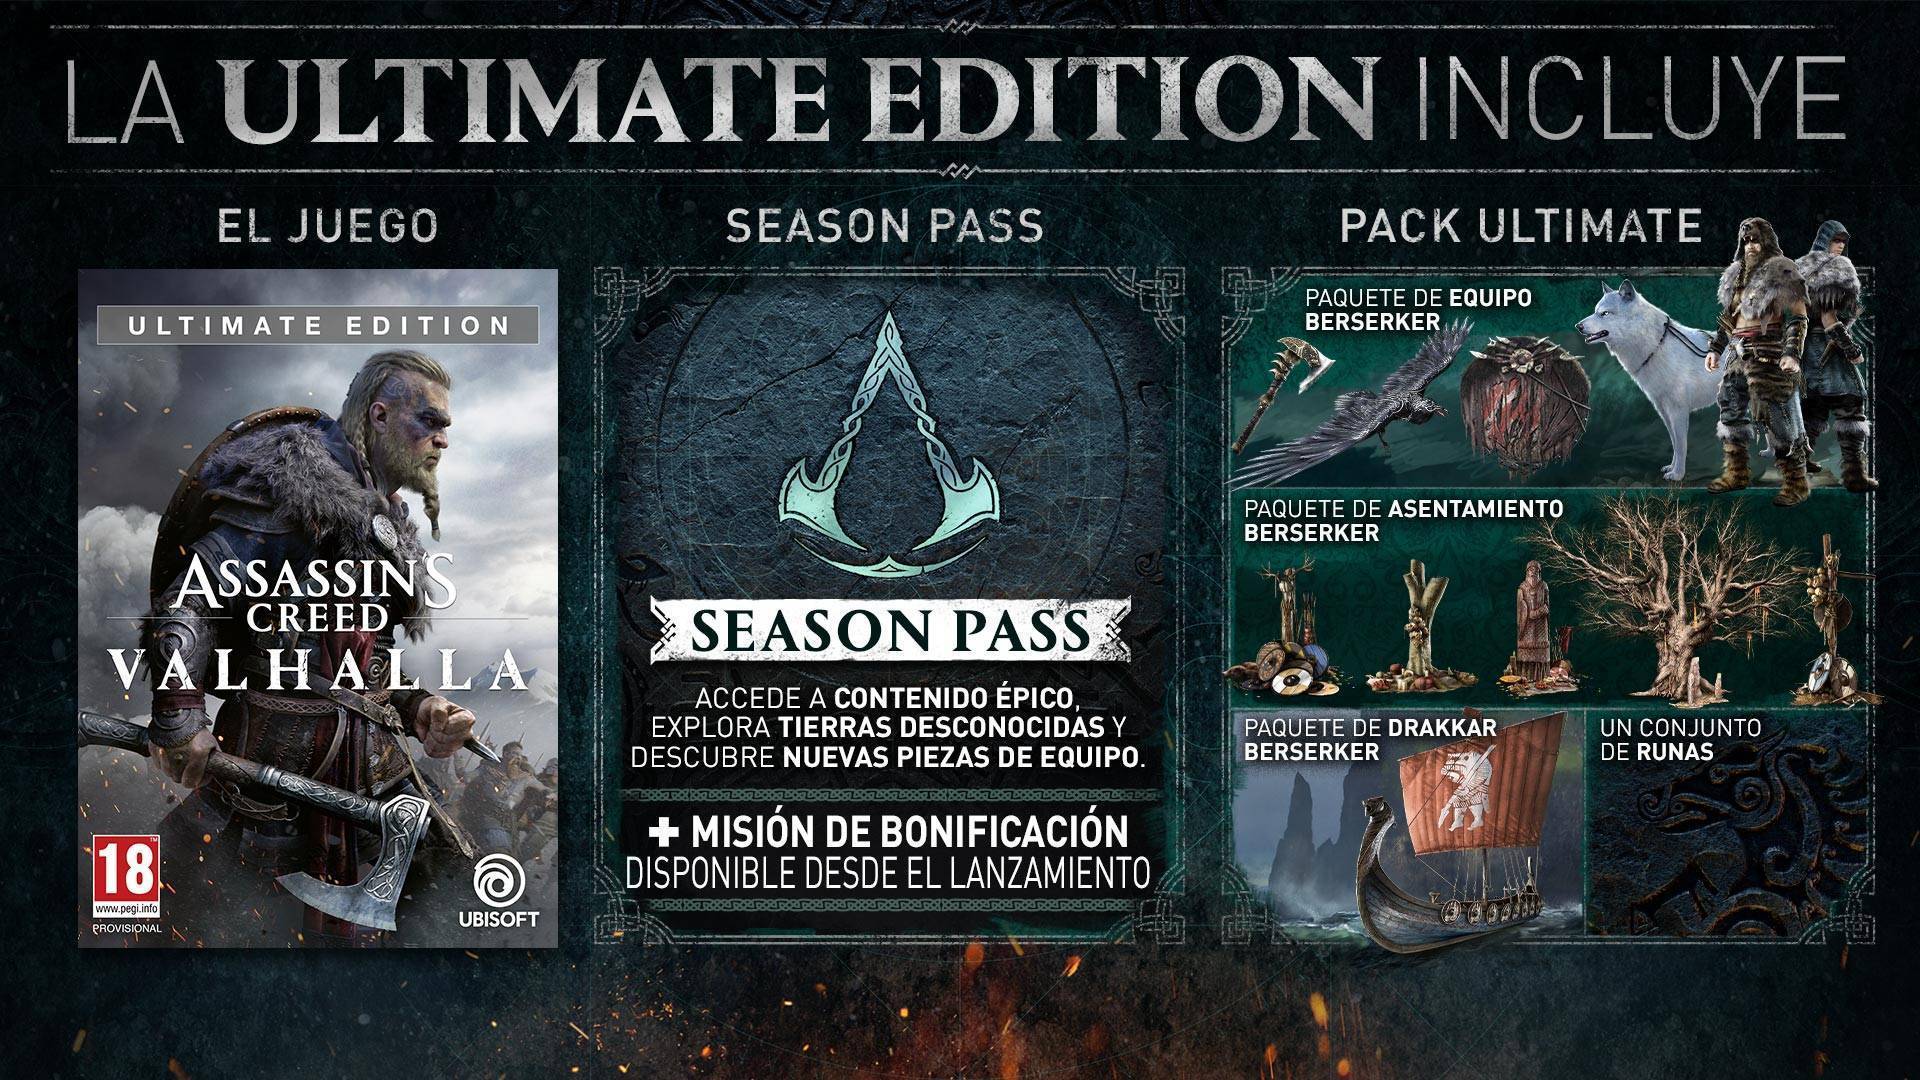 Assassins Creed Valhalla: Season Pass (PC) Key cheap - Price of $12.51 for  Uplay